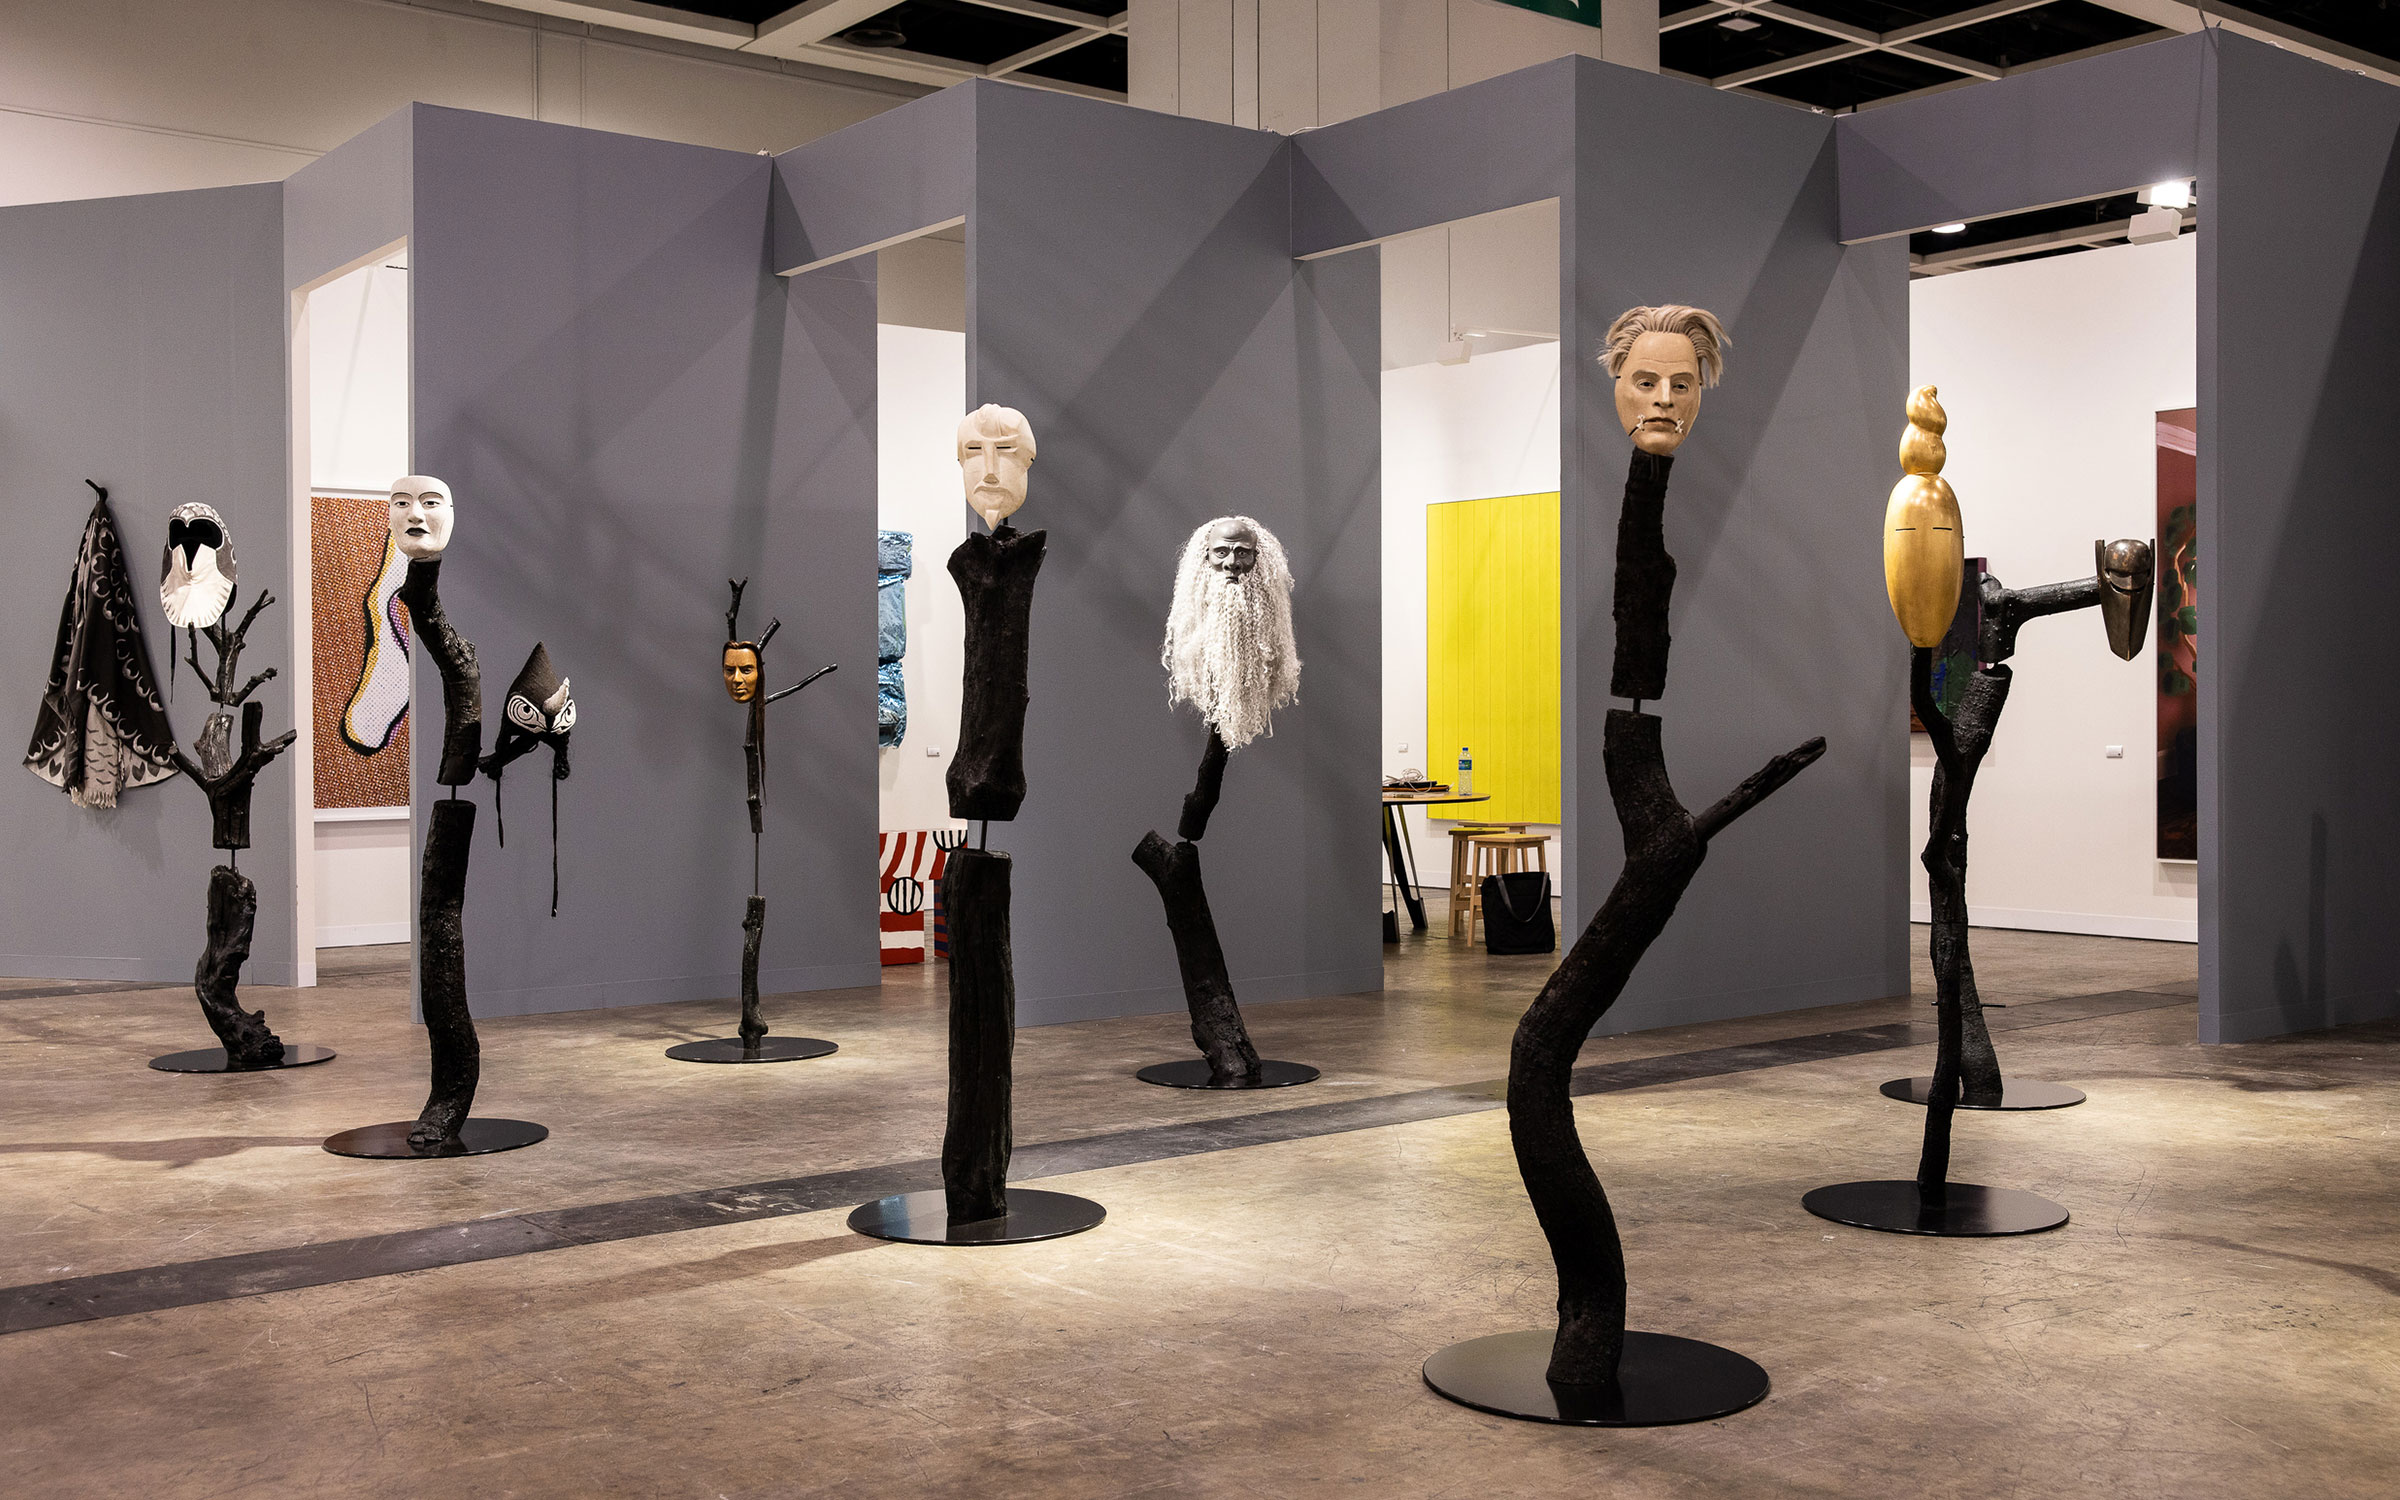 Eight sculptures in a room on display for Art Basel Hong Kong